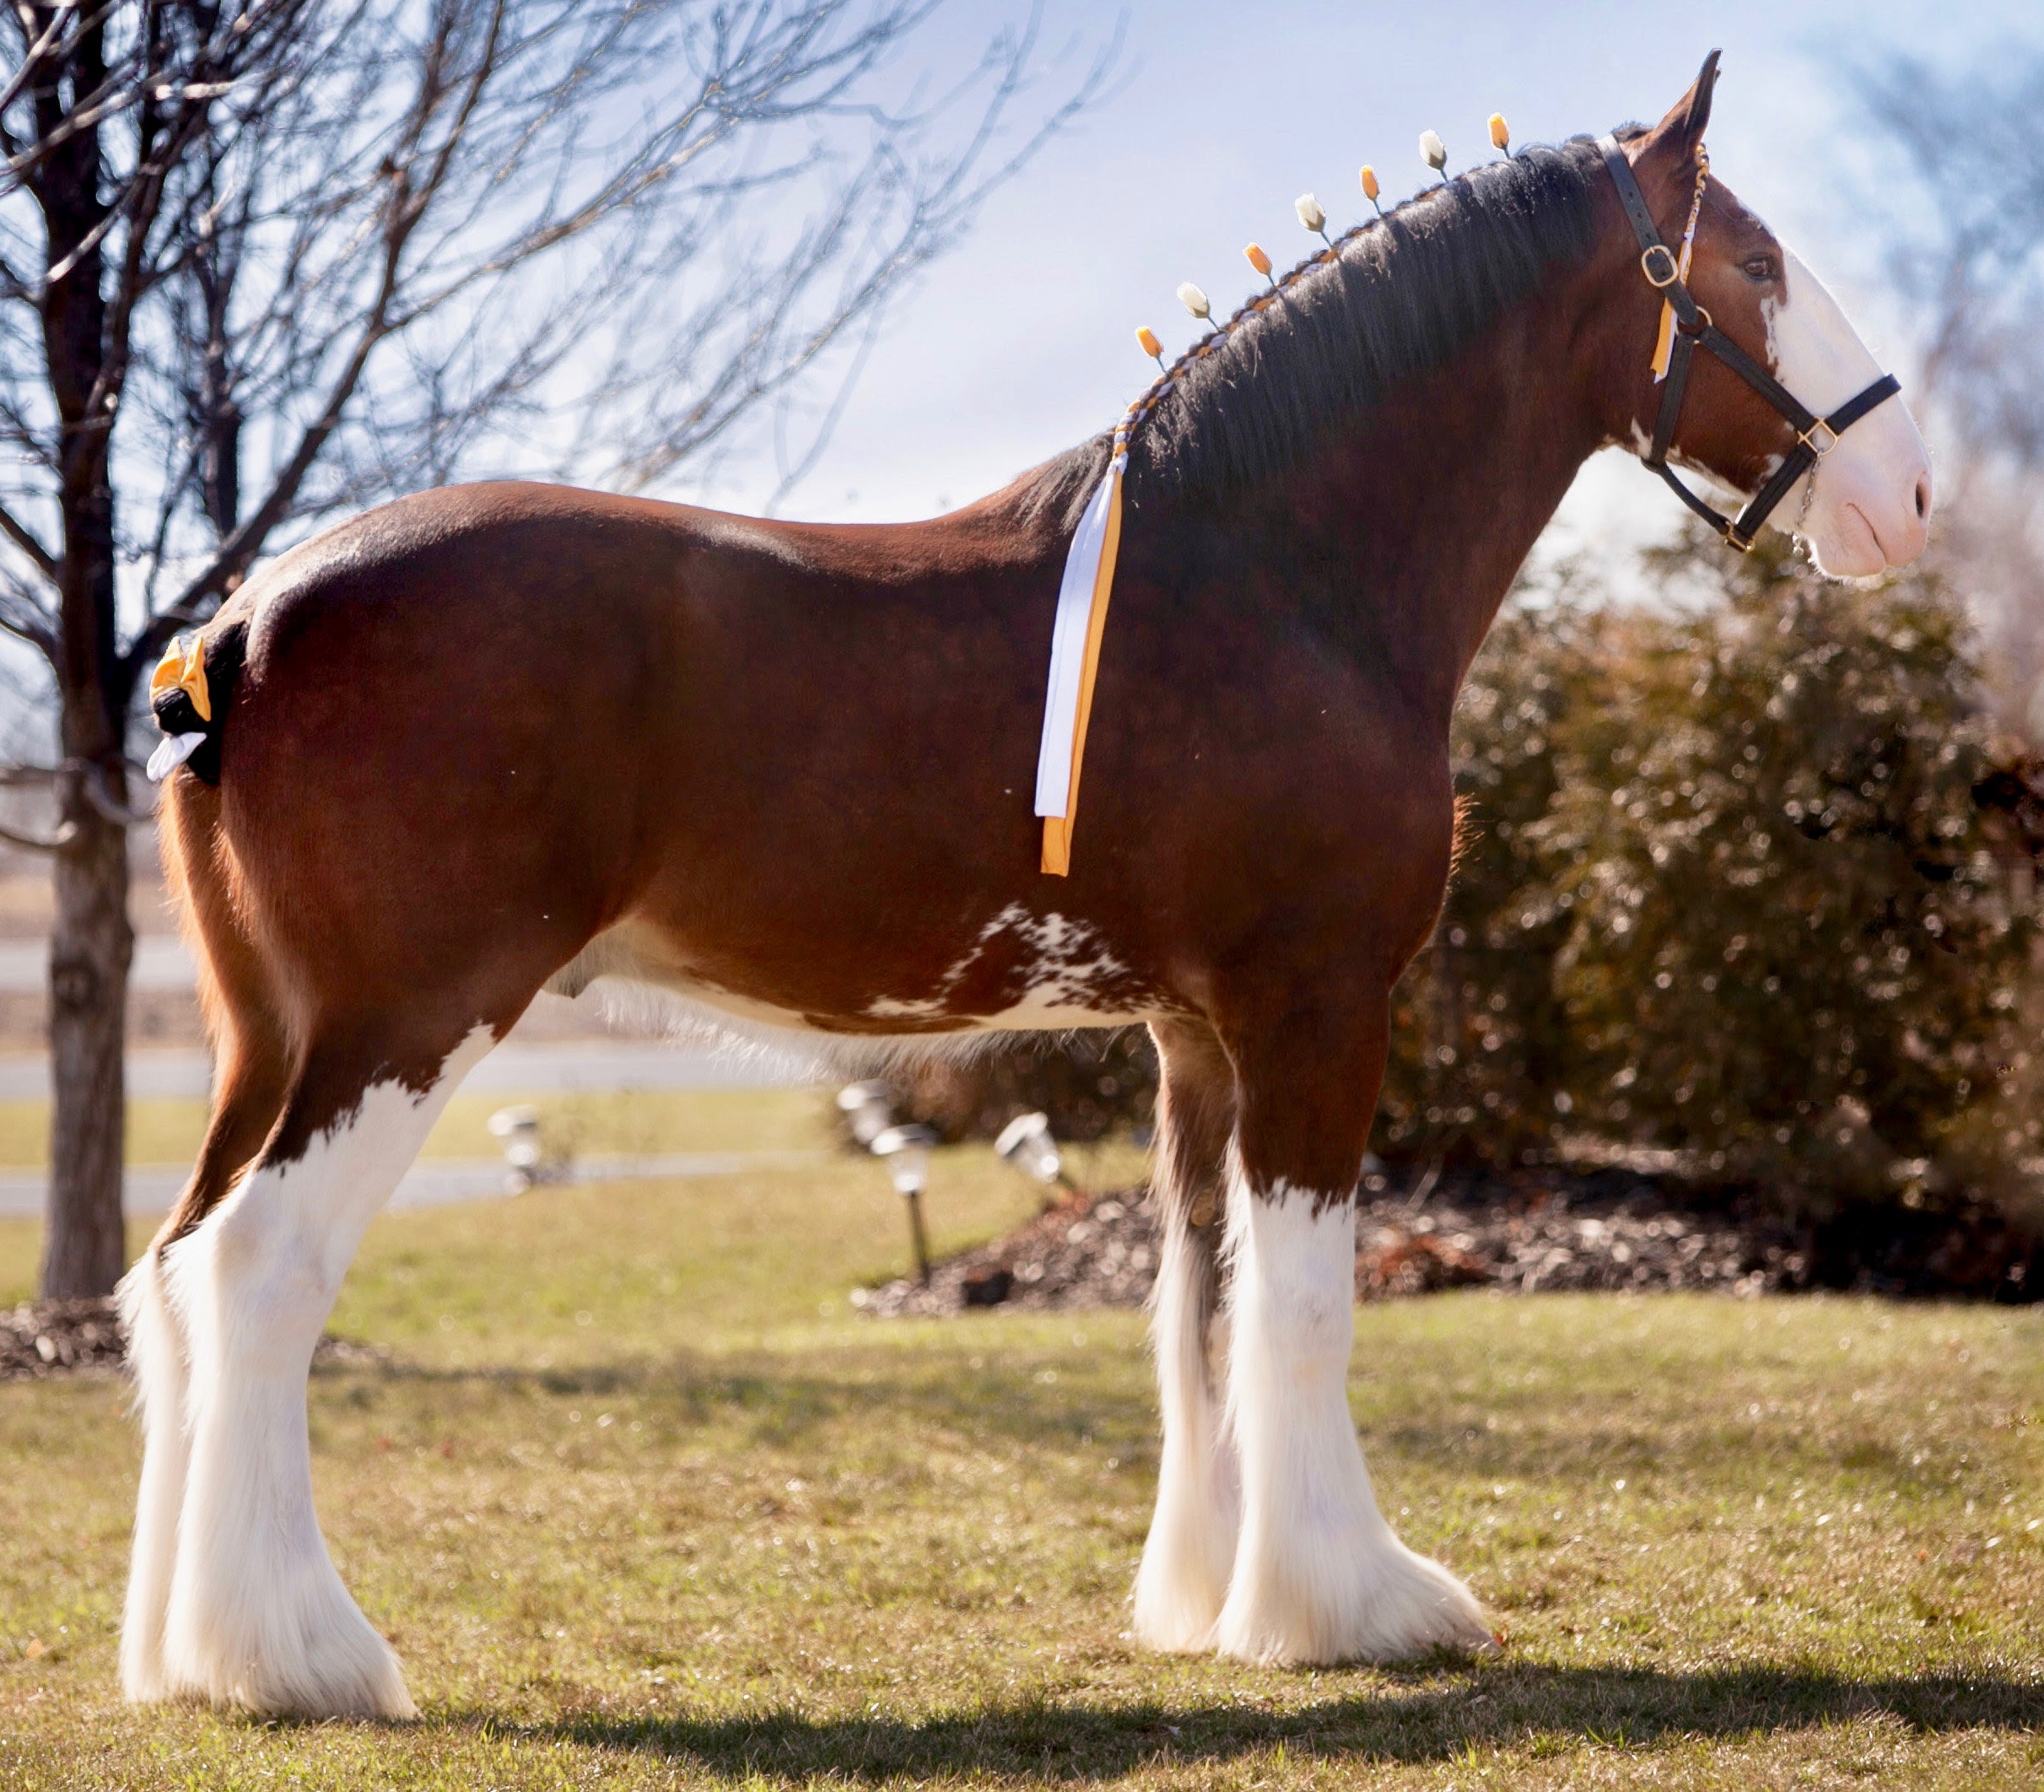 Clydesdale, Mechanical and Clydesdale horsepower offered at Gone Farmin’ auction, ClassicCars.com Journal